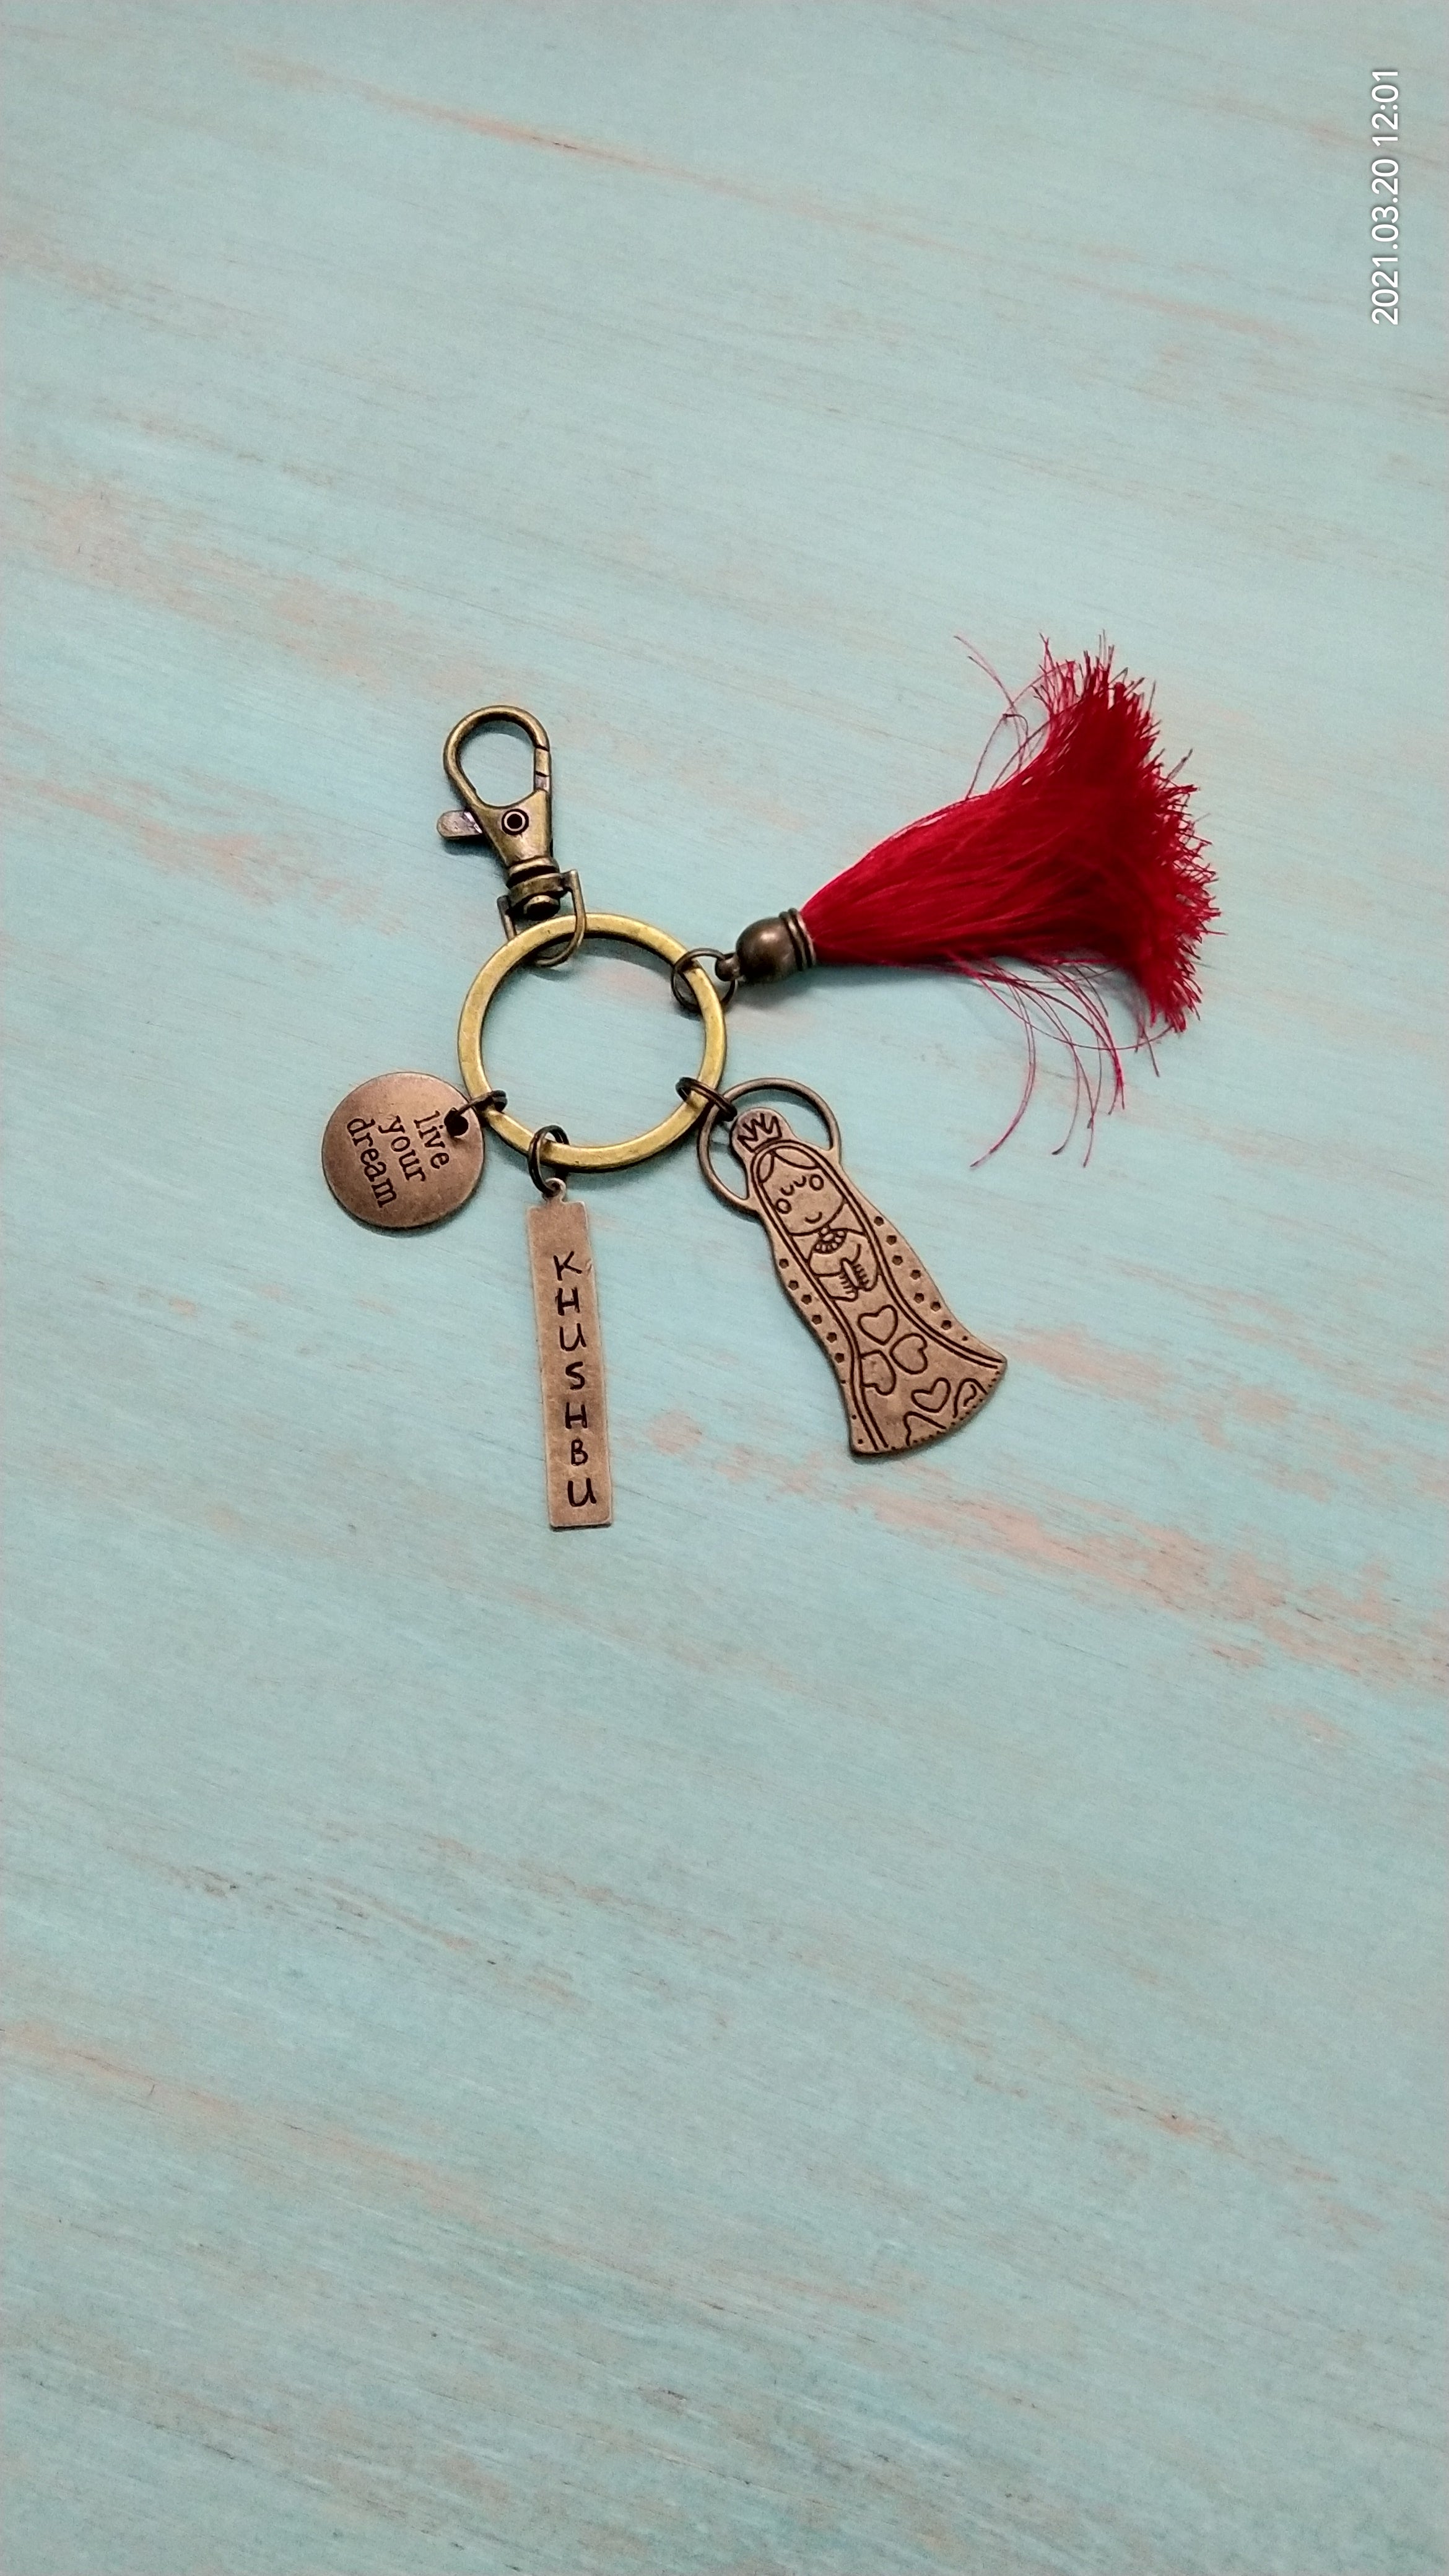 Queen of the house Keychain with name